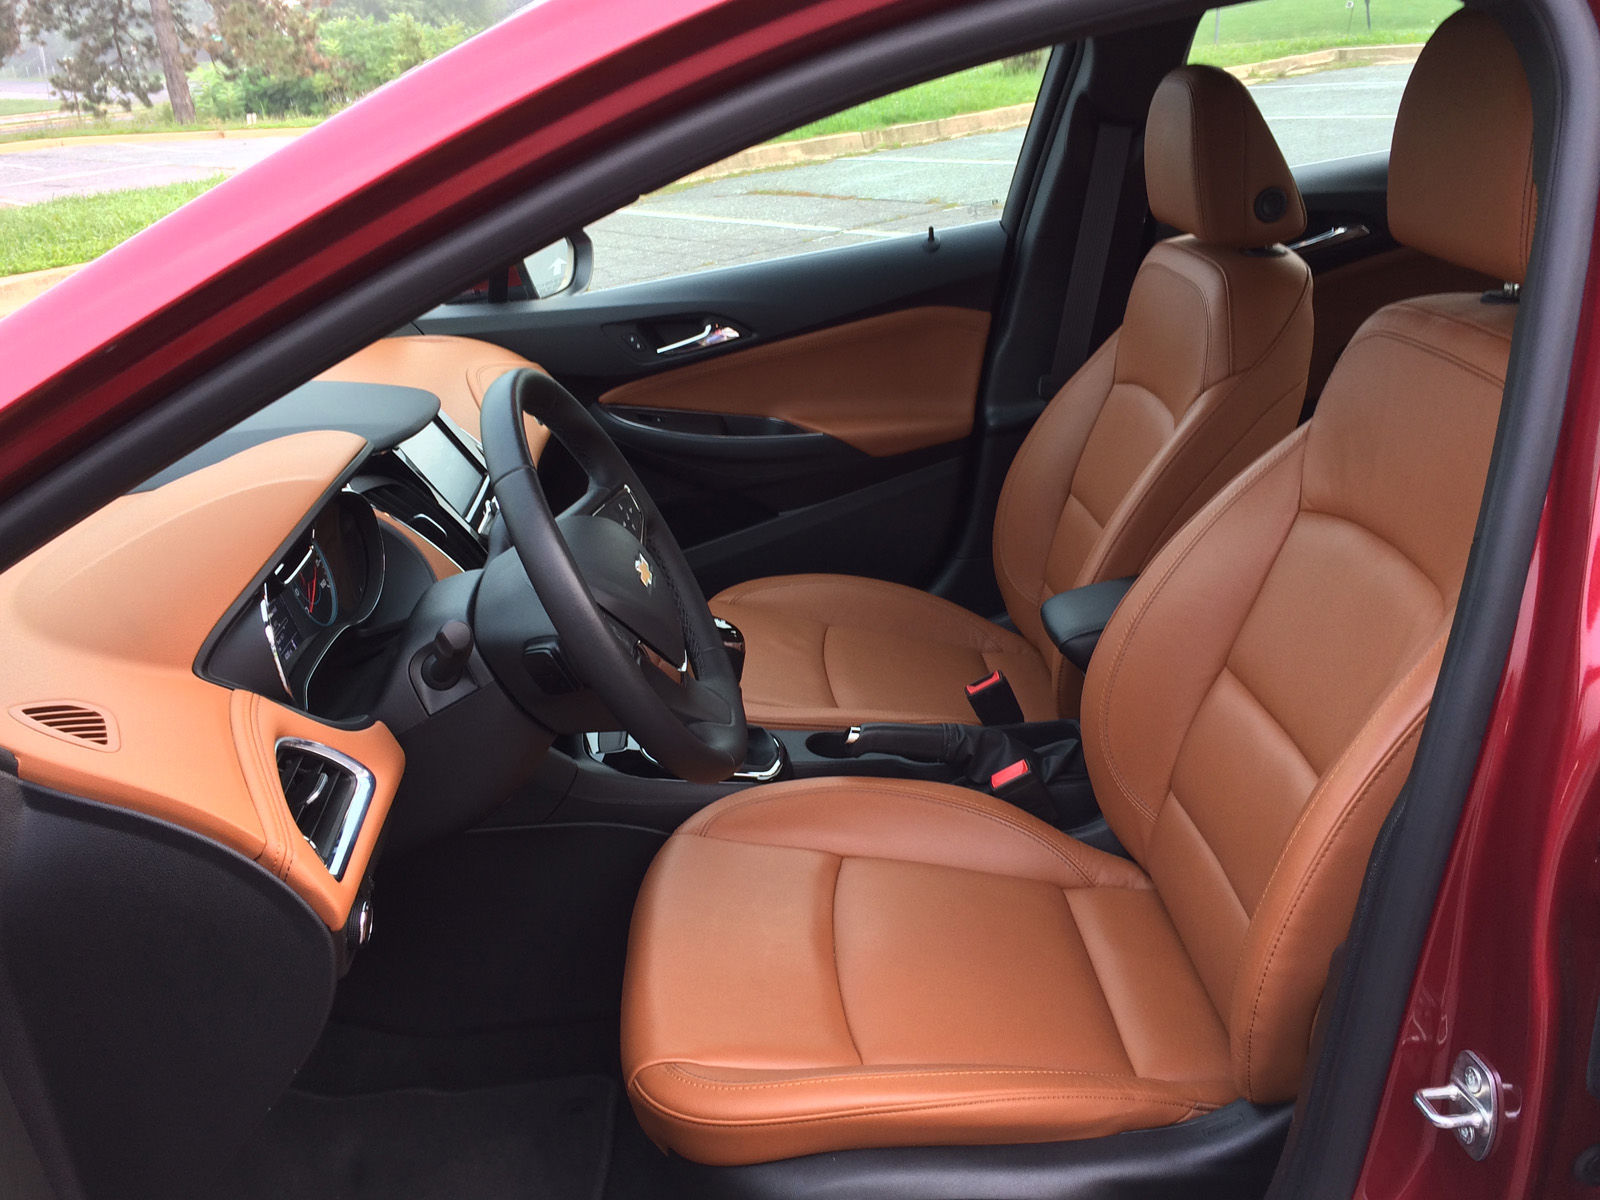 Chevy stepped up the interior with last year’s redesign. The materials are improved but there is still a good amount of hard, but better, looking plastics. (WTOP/Mike Parris)